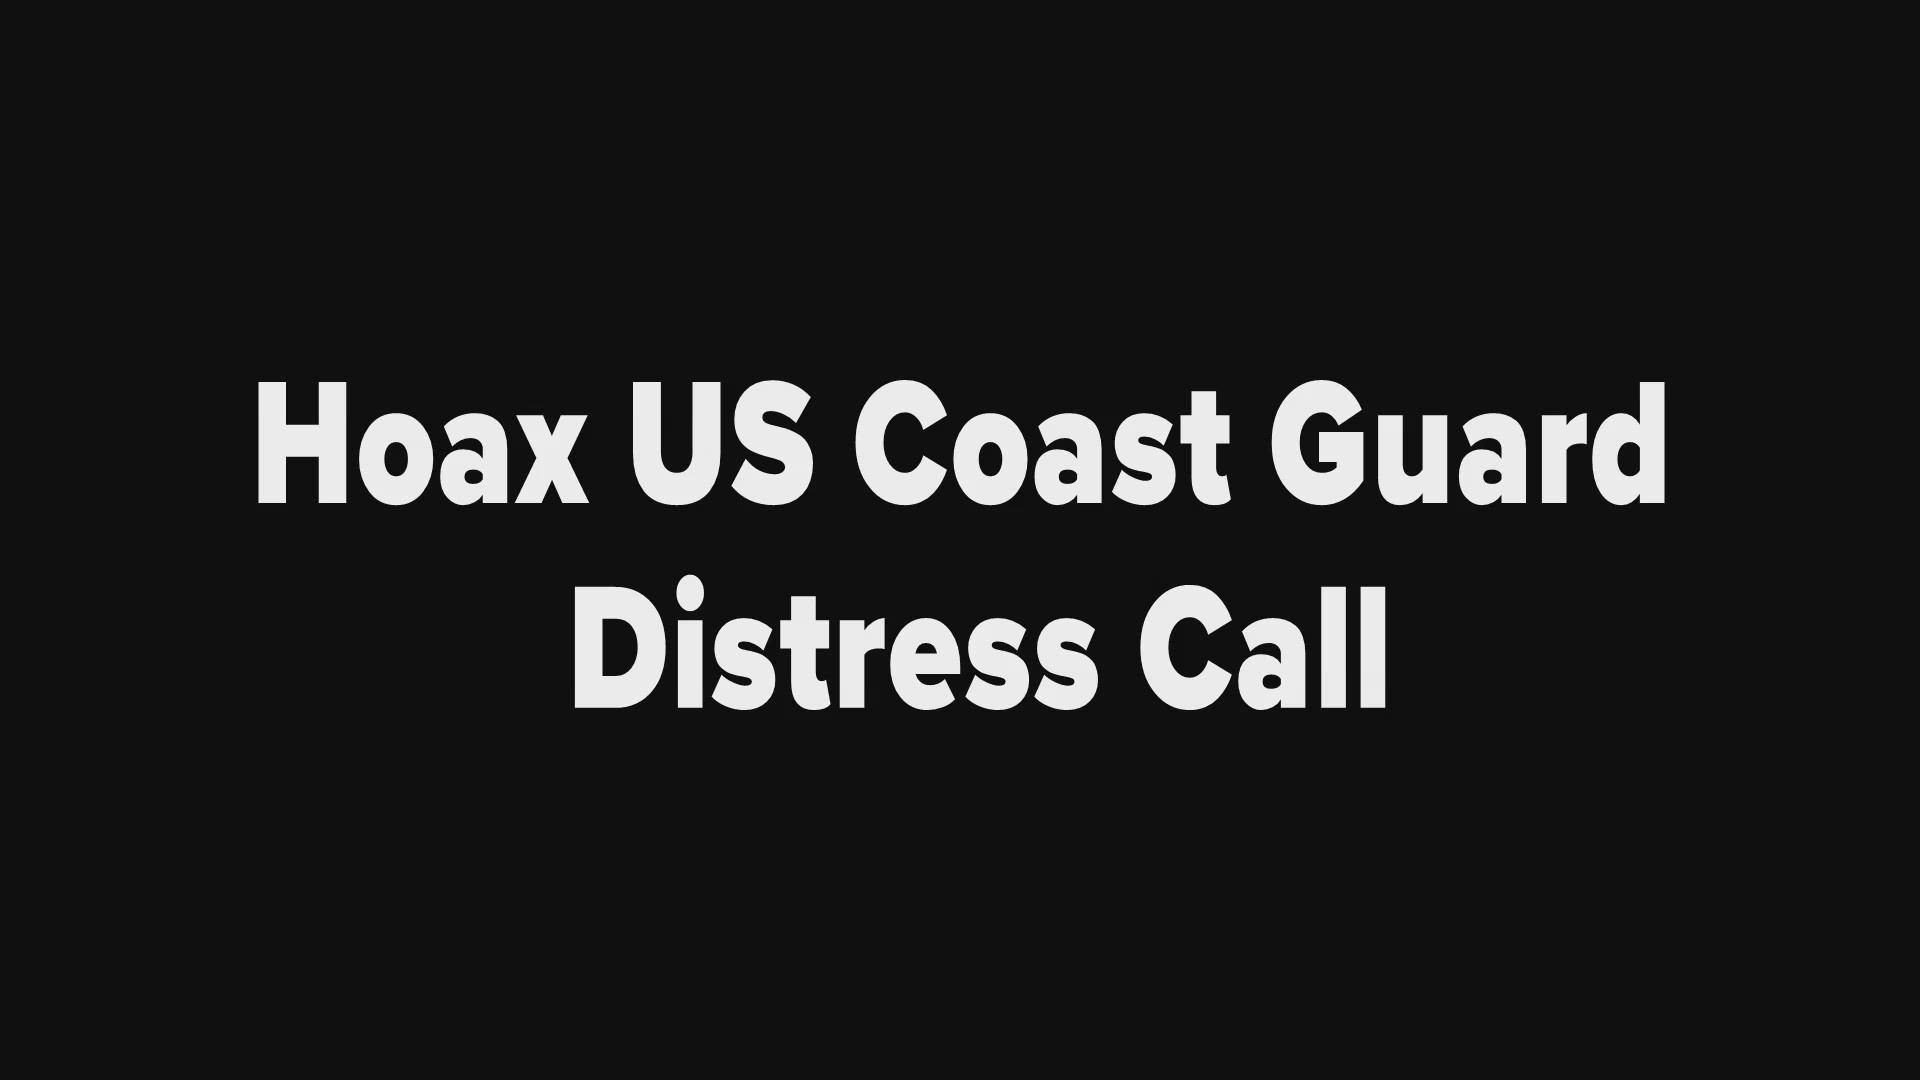 Audio of transmissions from suspected hoax caller on VHF-FM marine radio channel 16 in the vicinity of Pamlico Sound and Oregon Inlet, North Carolina, in June 2019. If you think you can help with identifying the caller, please contact the U.S. Coast Guard Investigative Service via the Sector North Carolina command center at 910-343-3880.